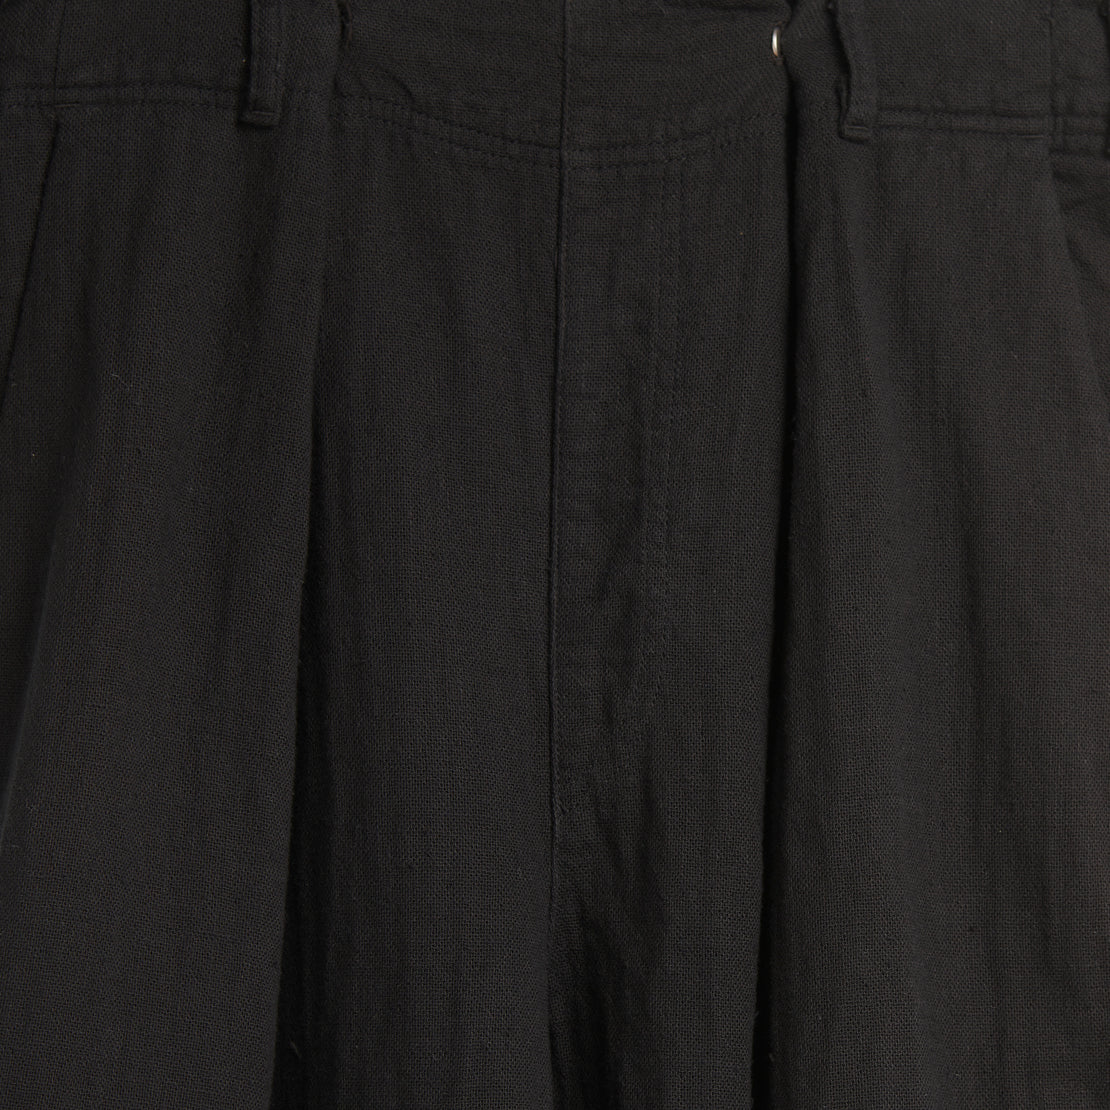 Astrid Pant - Black - Atelier Delphine - STAG Provisions - W - Pants - Twill